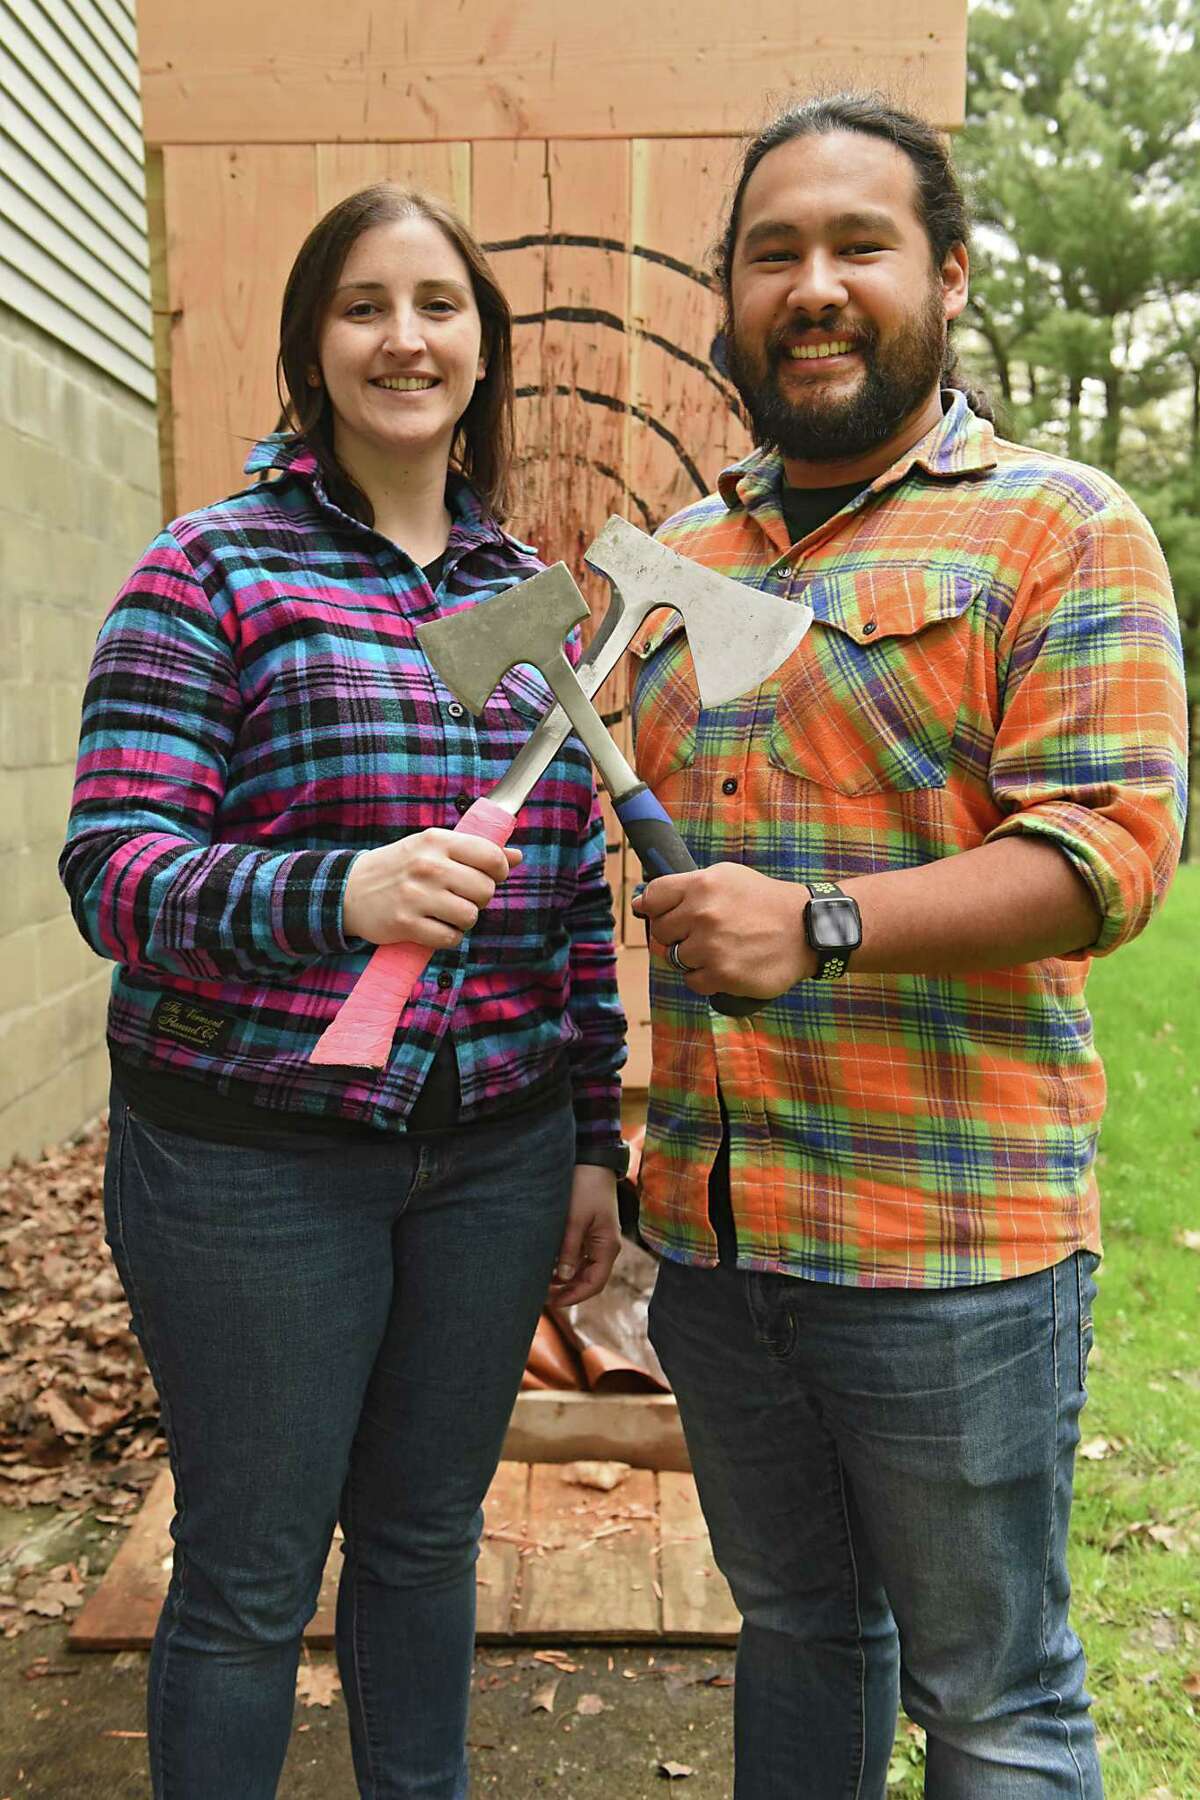 Kristyn Muller and Mark Mirasol, the founders of Lazy Axe, hold axes in front of a target in the back of their home on Friday, May 3, 2019 in Rensselaer, N.Y. The couple hopes to open their business, which is on Central Ave. in Colonie, in a month.(Lori Van Buren/Times Union)